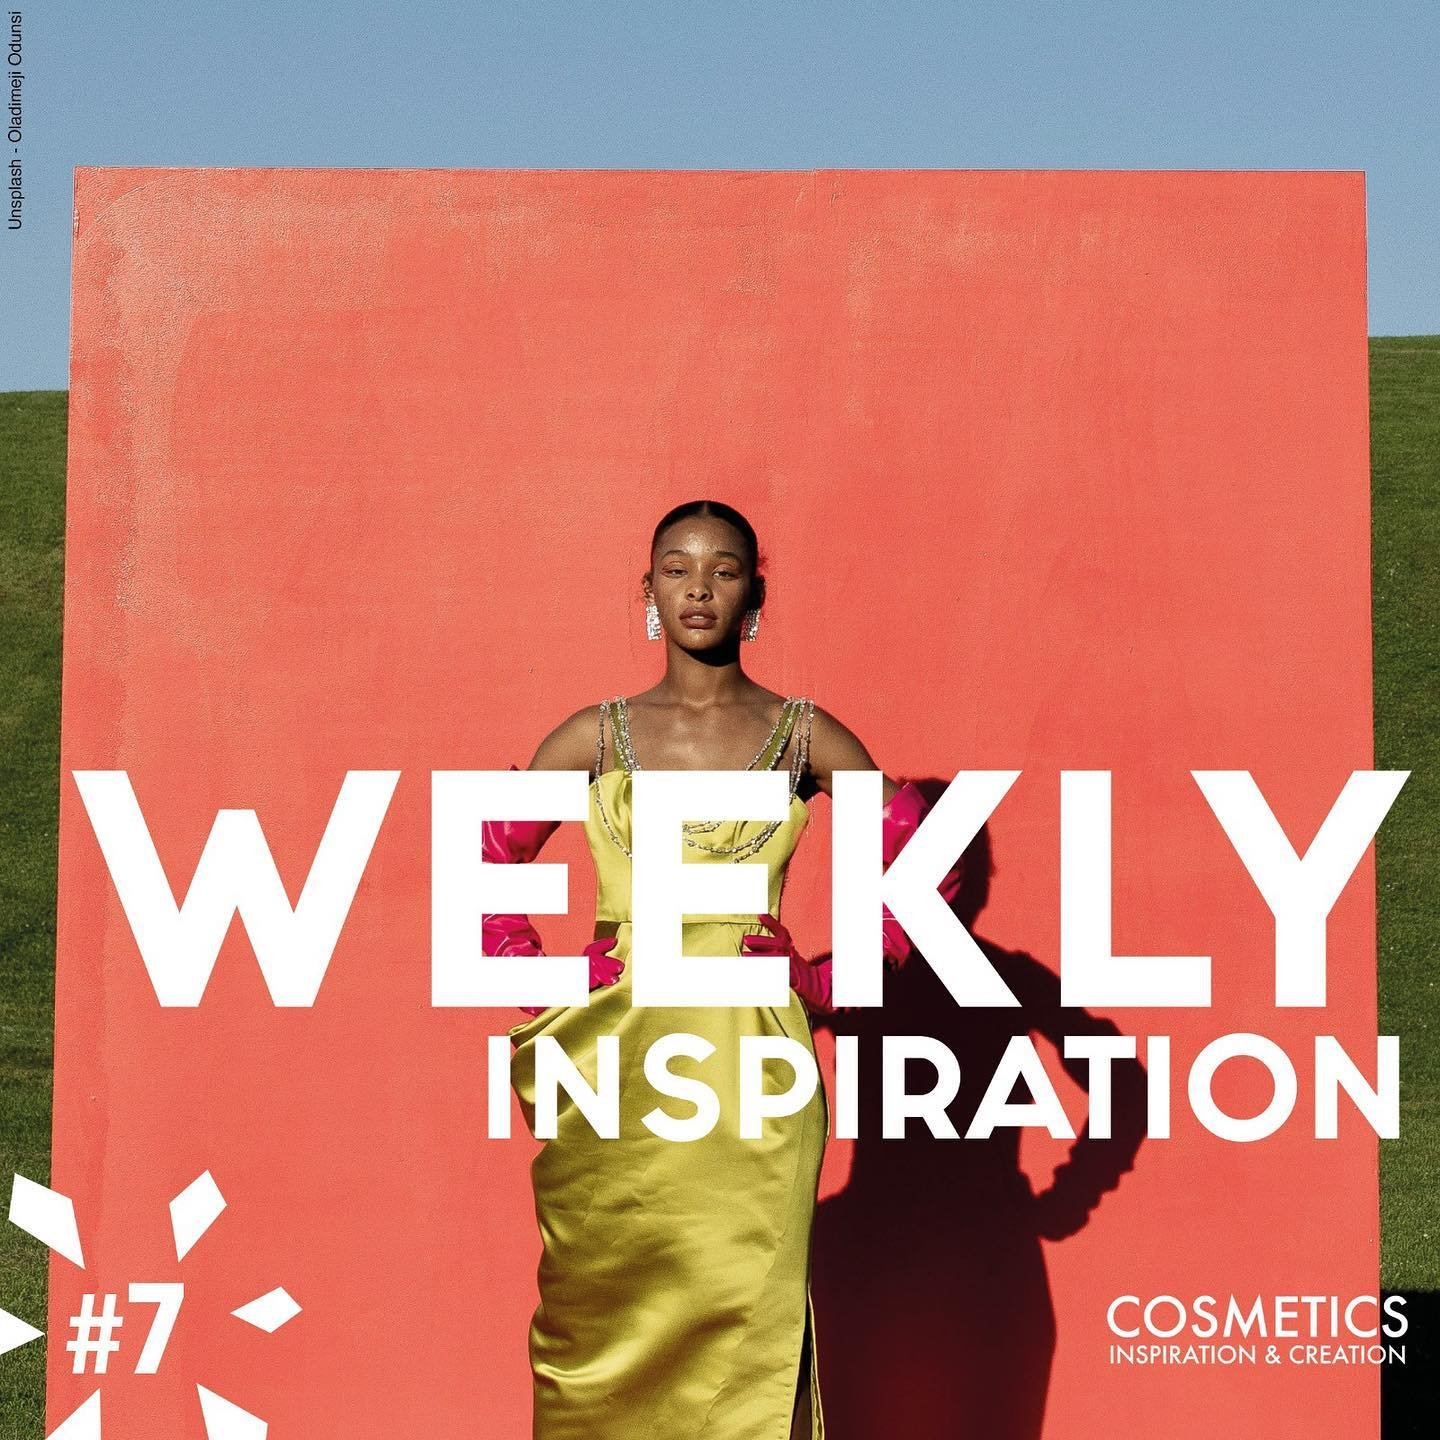 Weekly Inspiration #7 - a curation of beauty, fashion and retails news. Find us on X, Linkedin &amp; TikTok to be updated on all the inspiring news.

Charlotte Tilbury extends its franchise beyond makeup and skincare with neuro-fragrances. The brand&